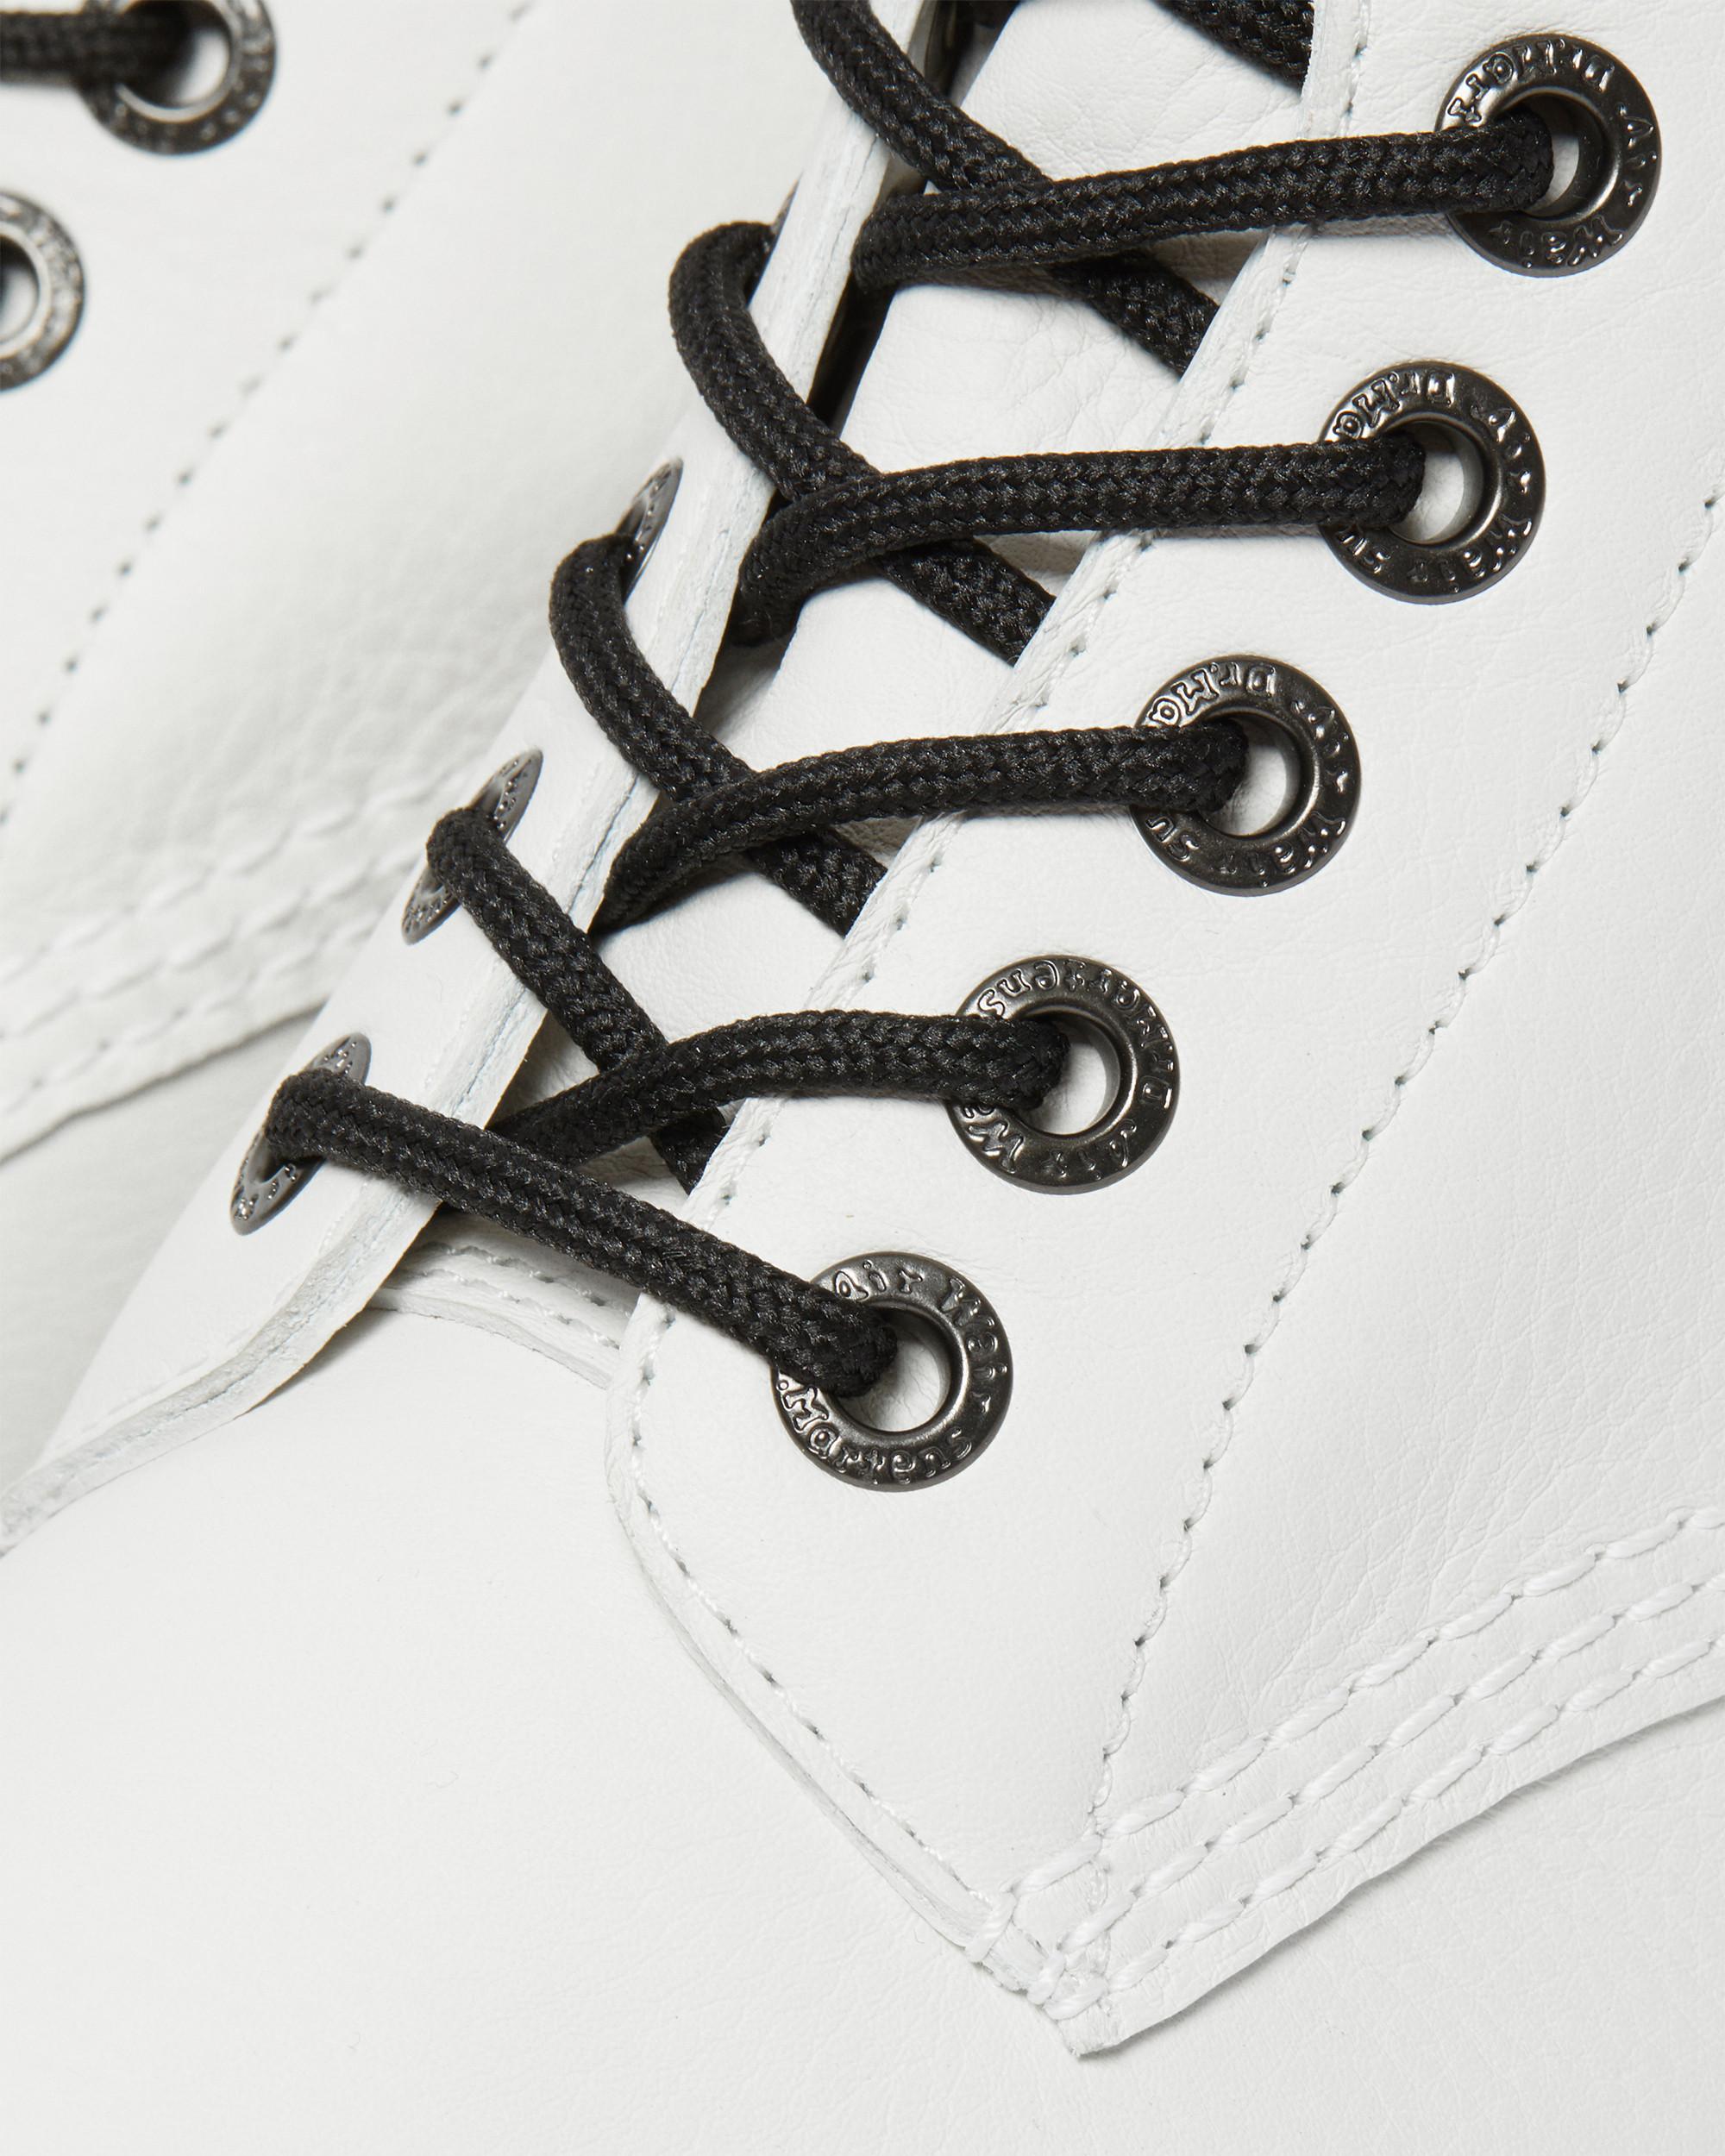 1460 Pascal Bex Pisa Leather Lace Up Boots in White | Dr. Martens